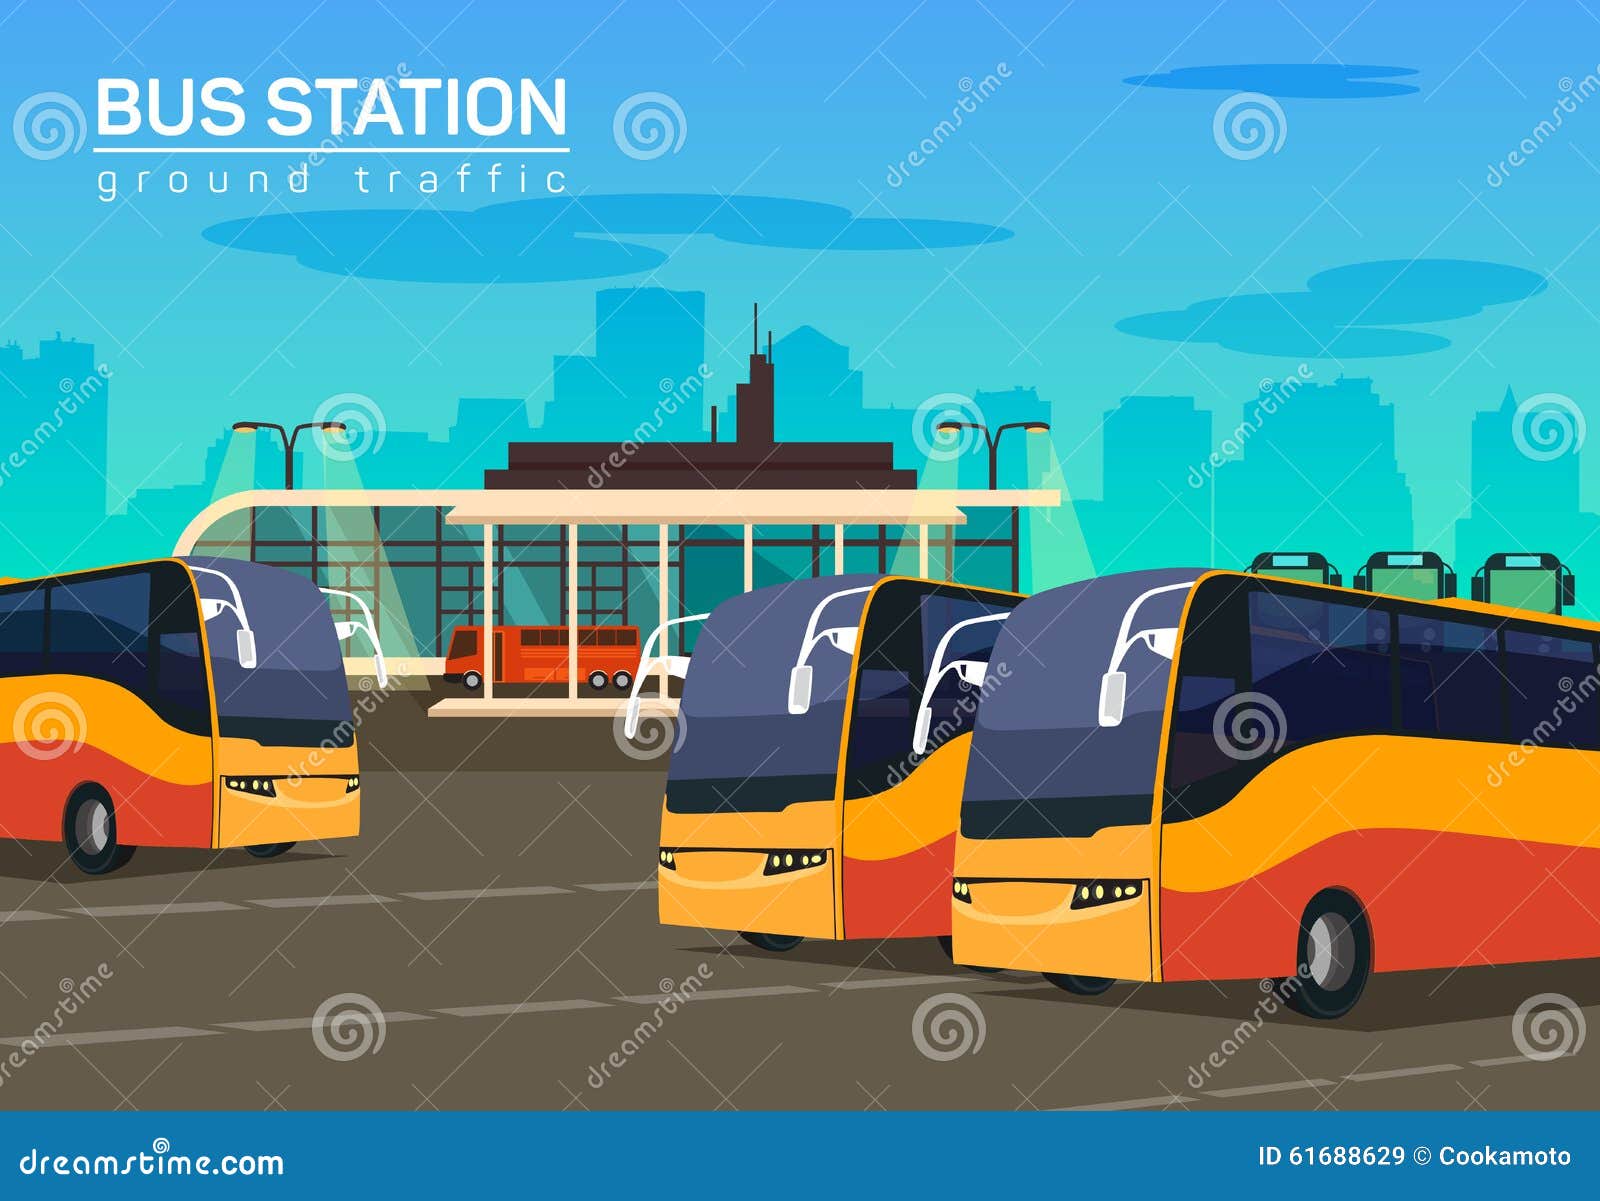 clipart bus station - photo #33